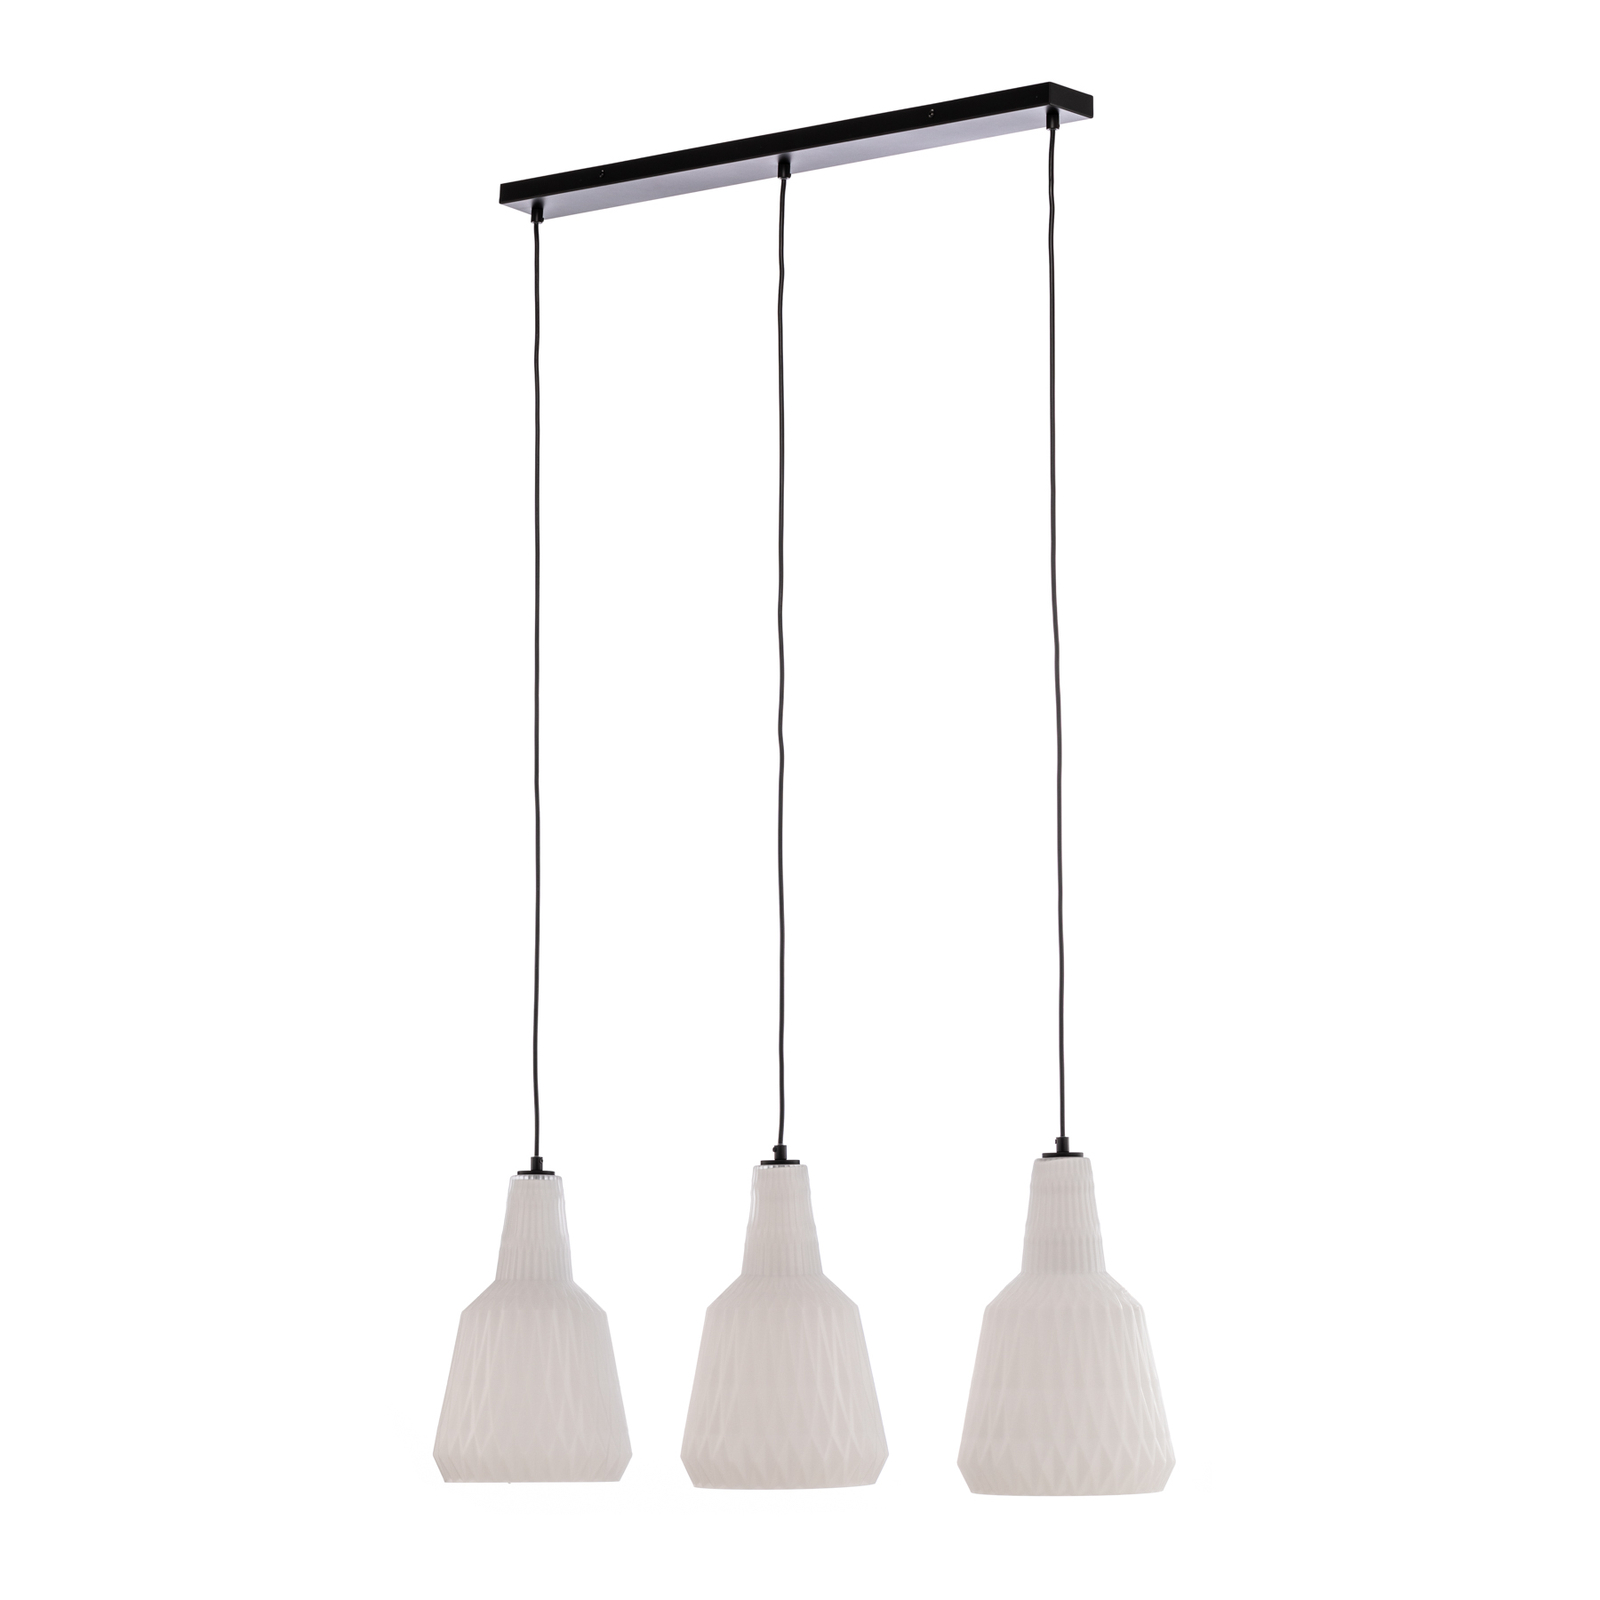 Lindby hanglamp Belarion, opaal, 3-lamps, glas, Ø 23 cm